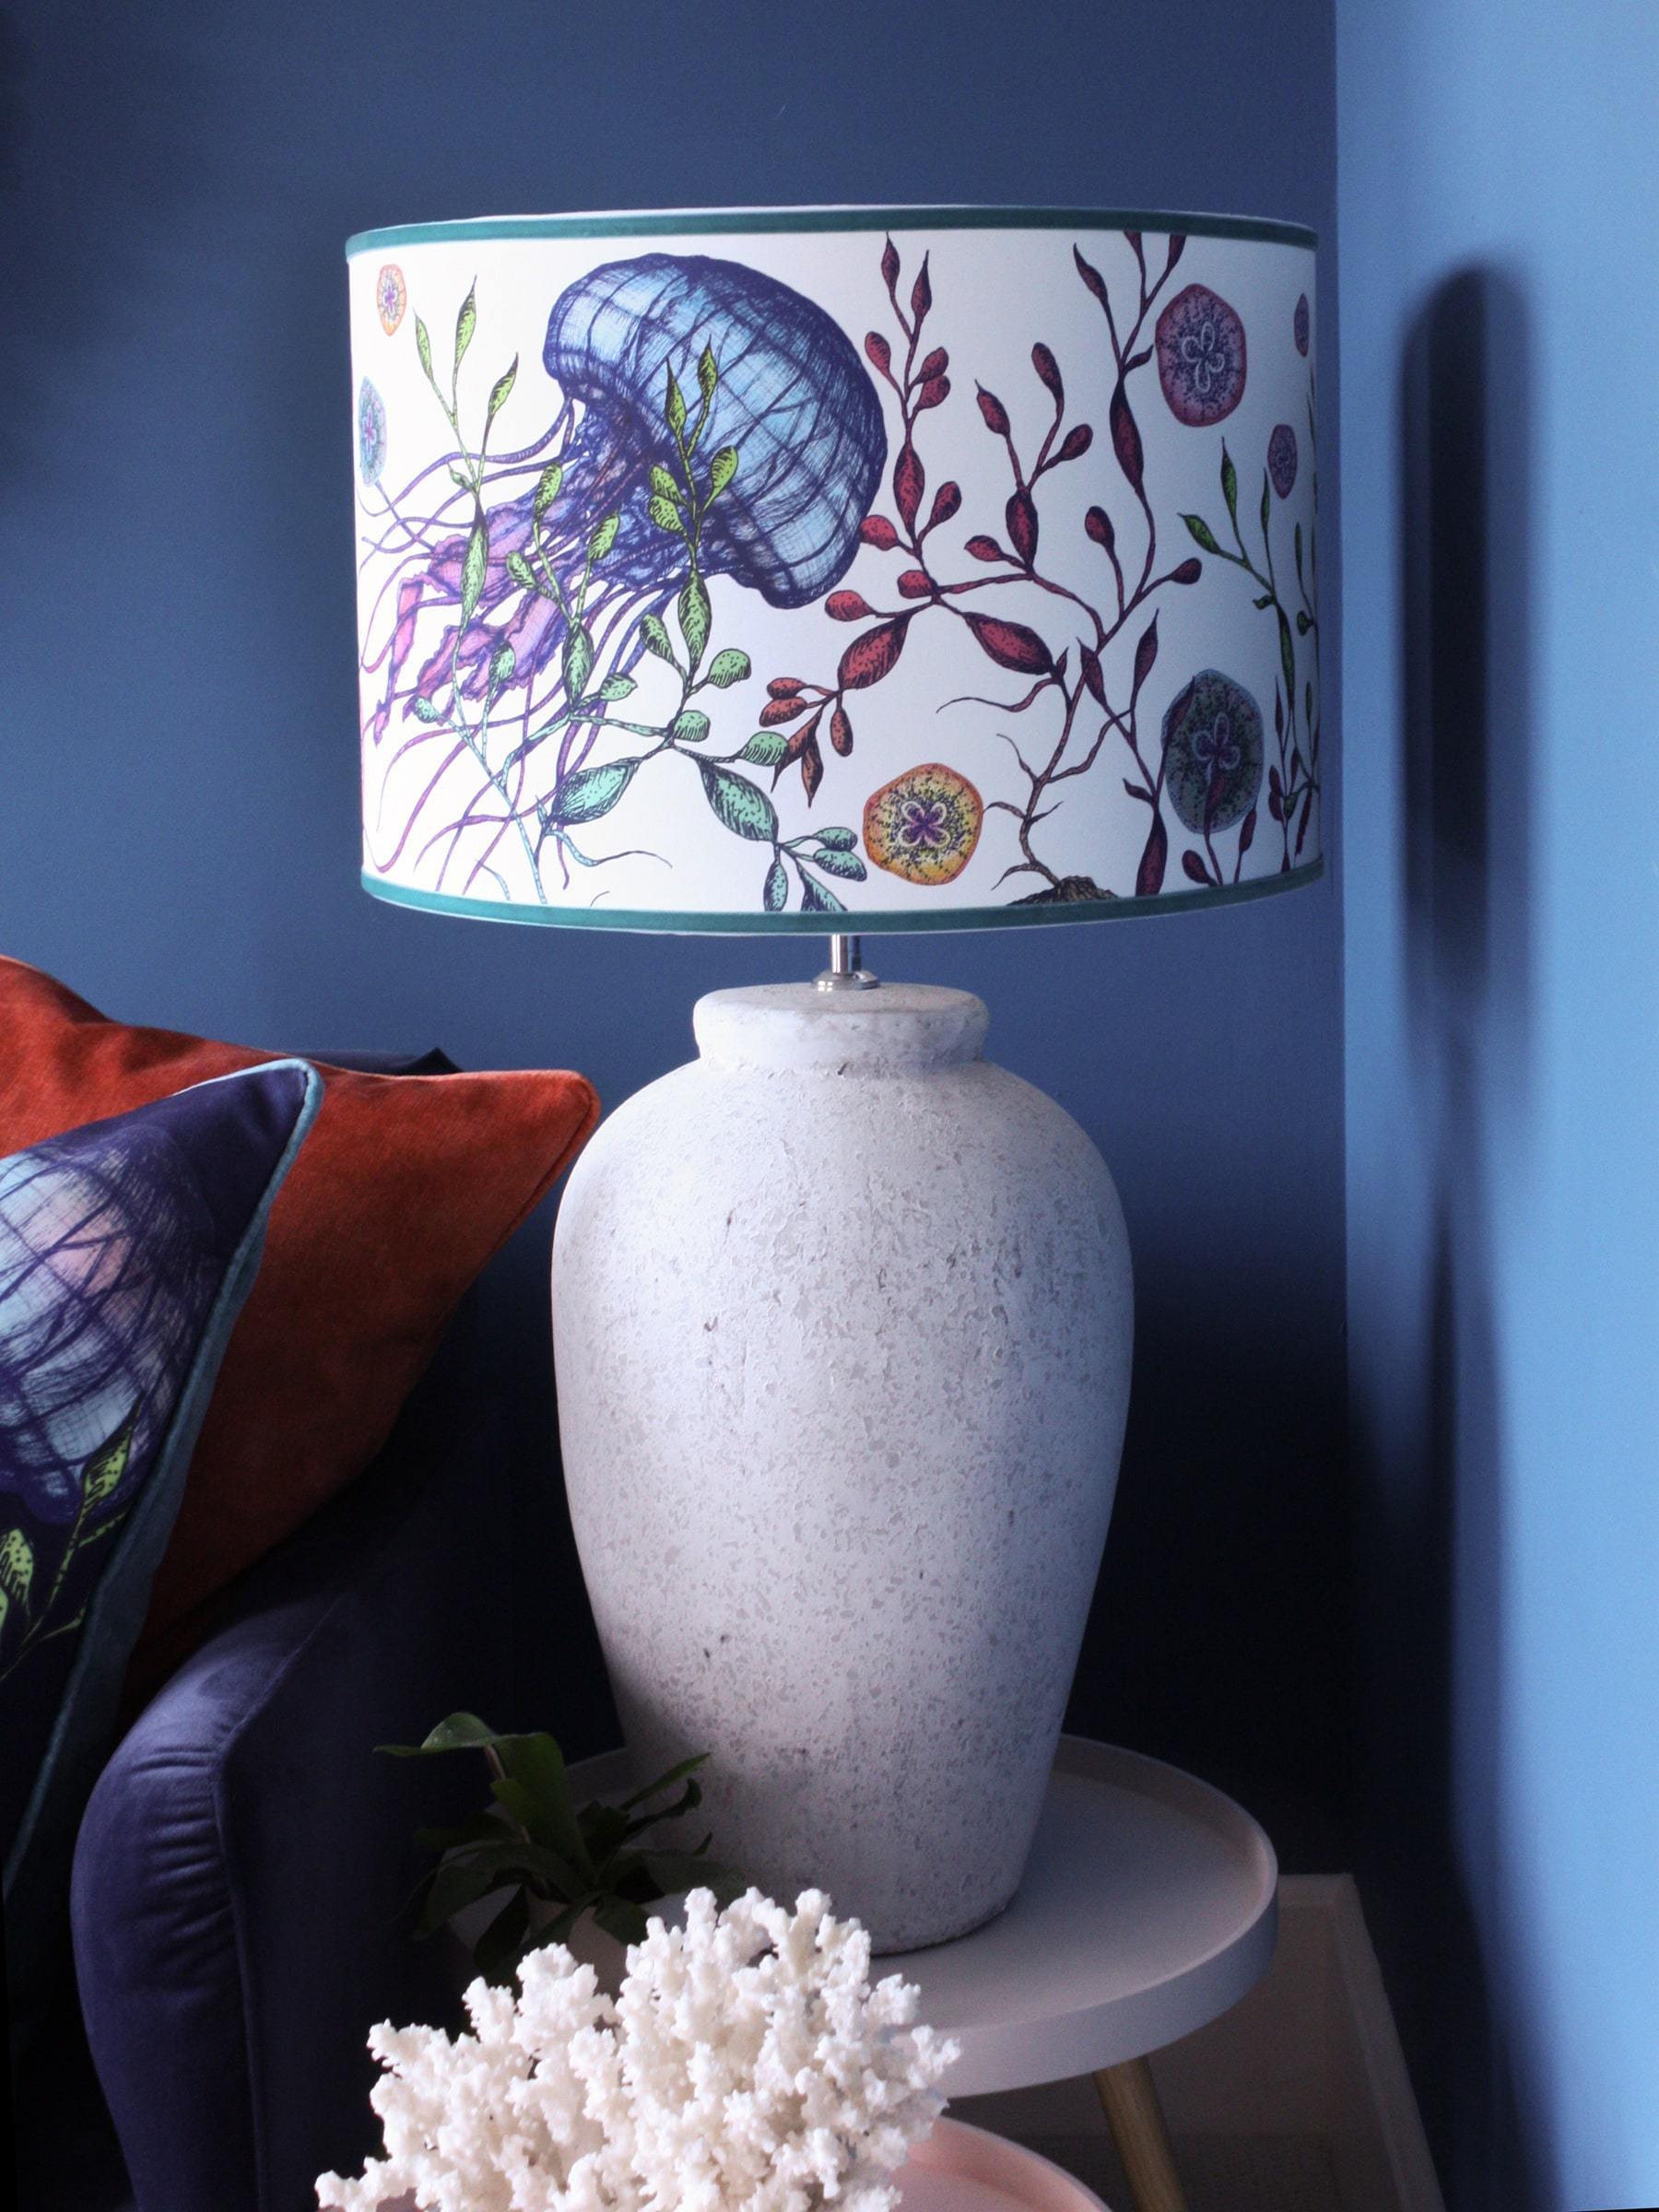 Canyons Reef White Lampshade With Jellyfish Design on a white lampbase ona small table next to a navy sofa.